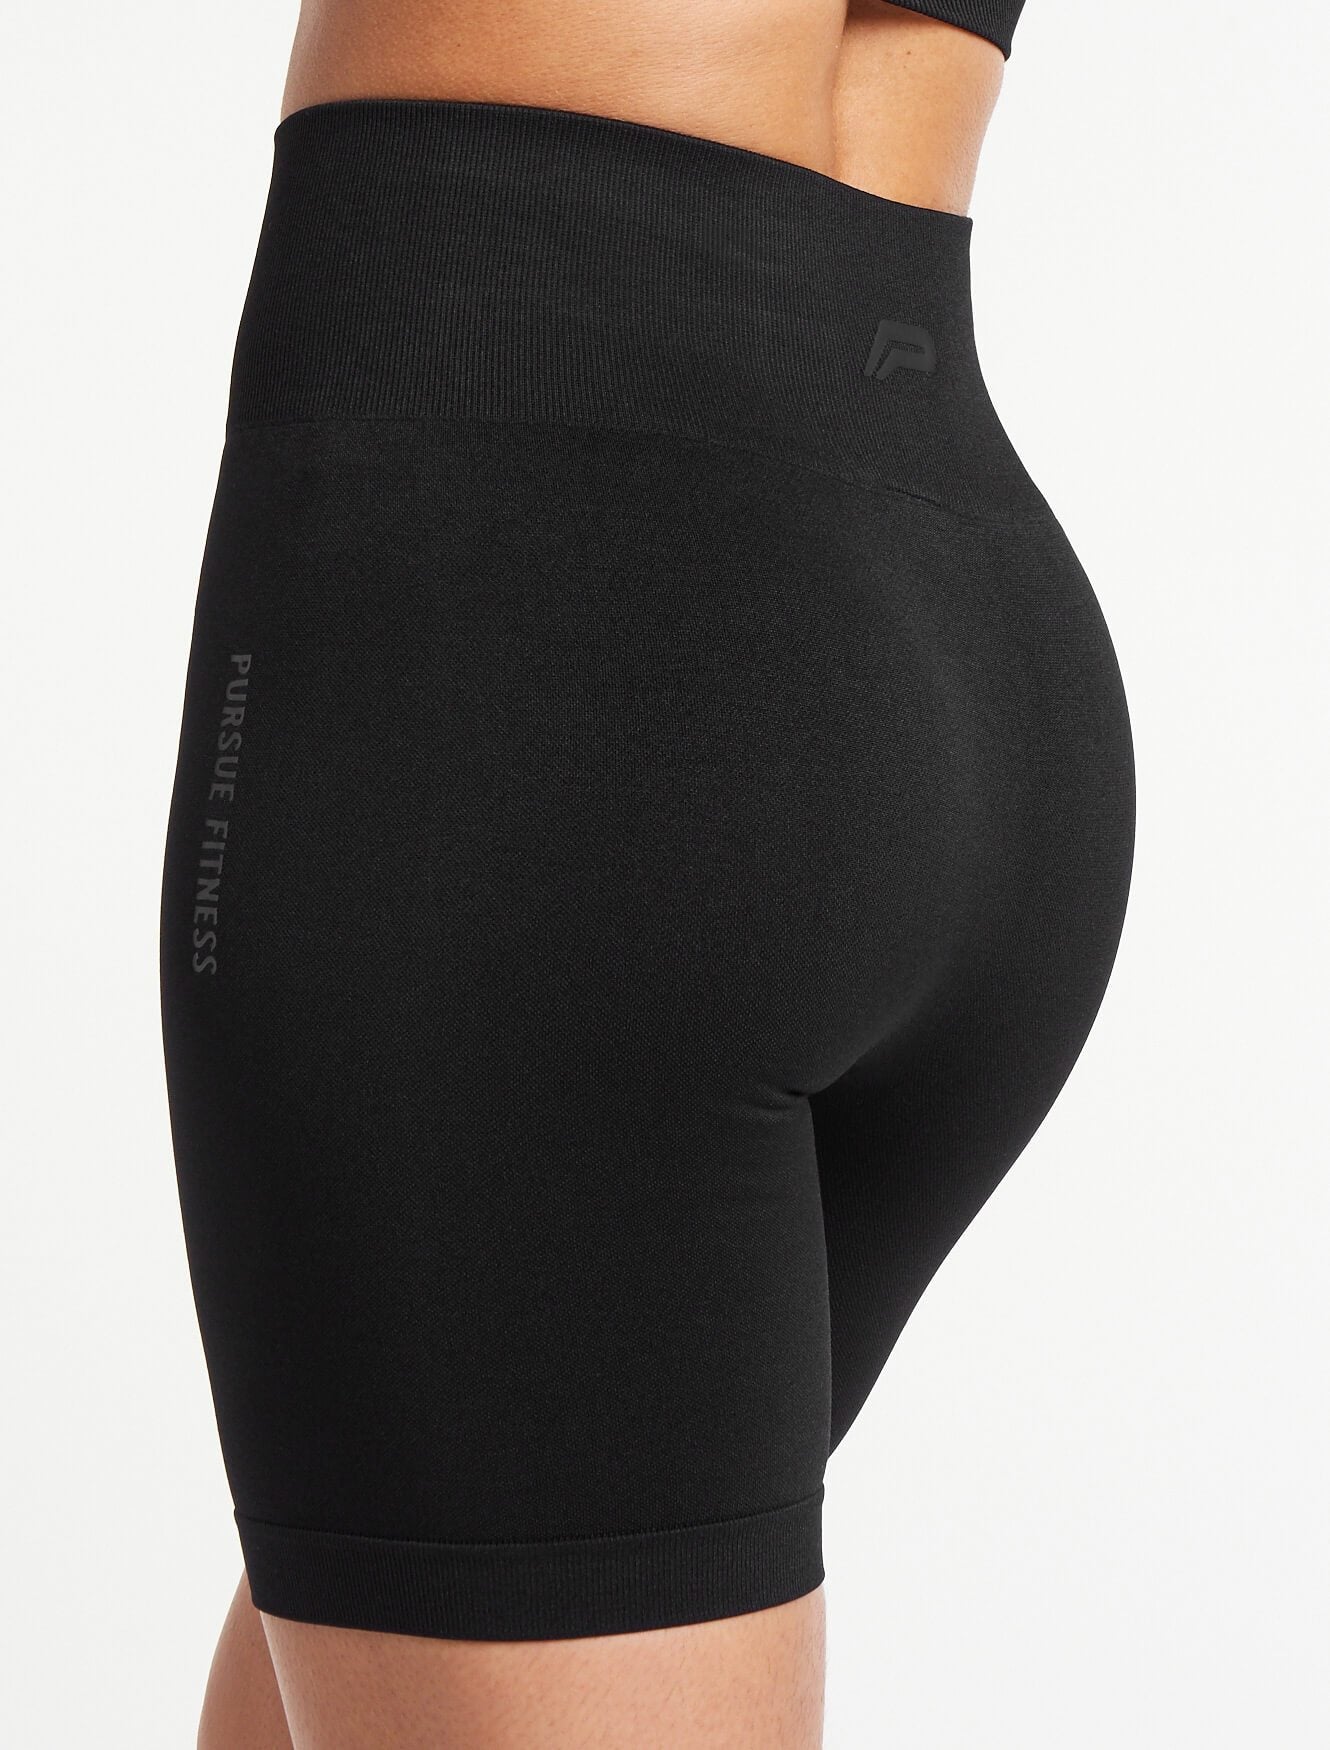 Afterglow Seamless Shorts / Blackout Pursue Fitness 5